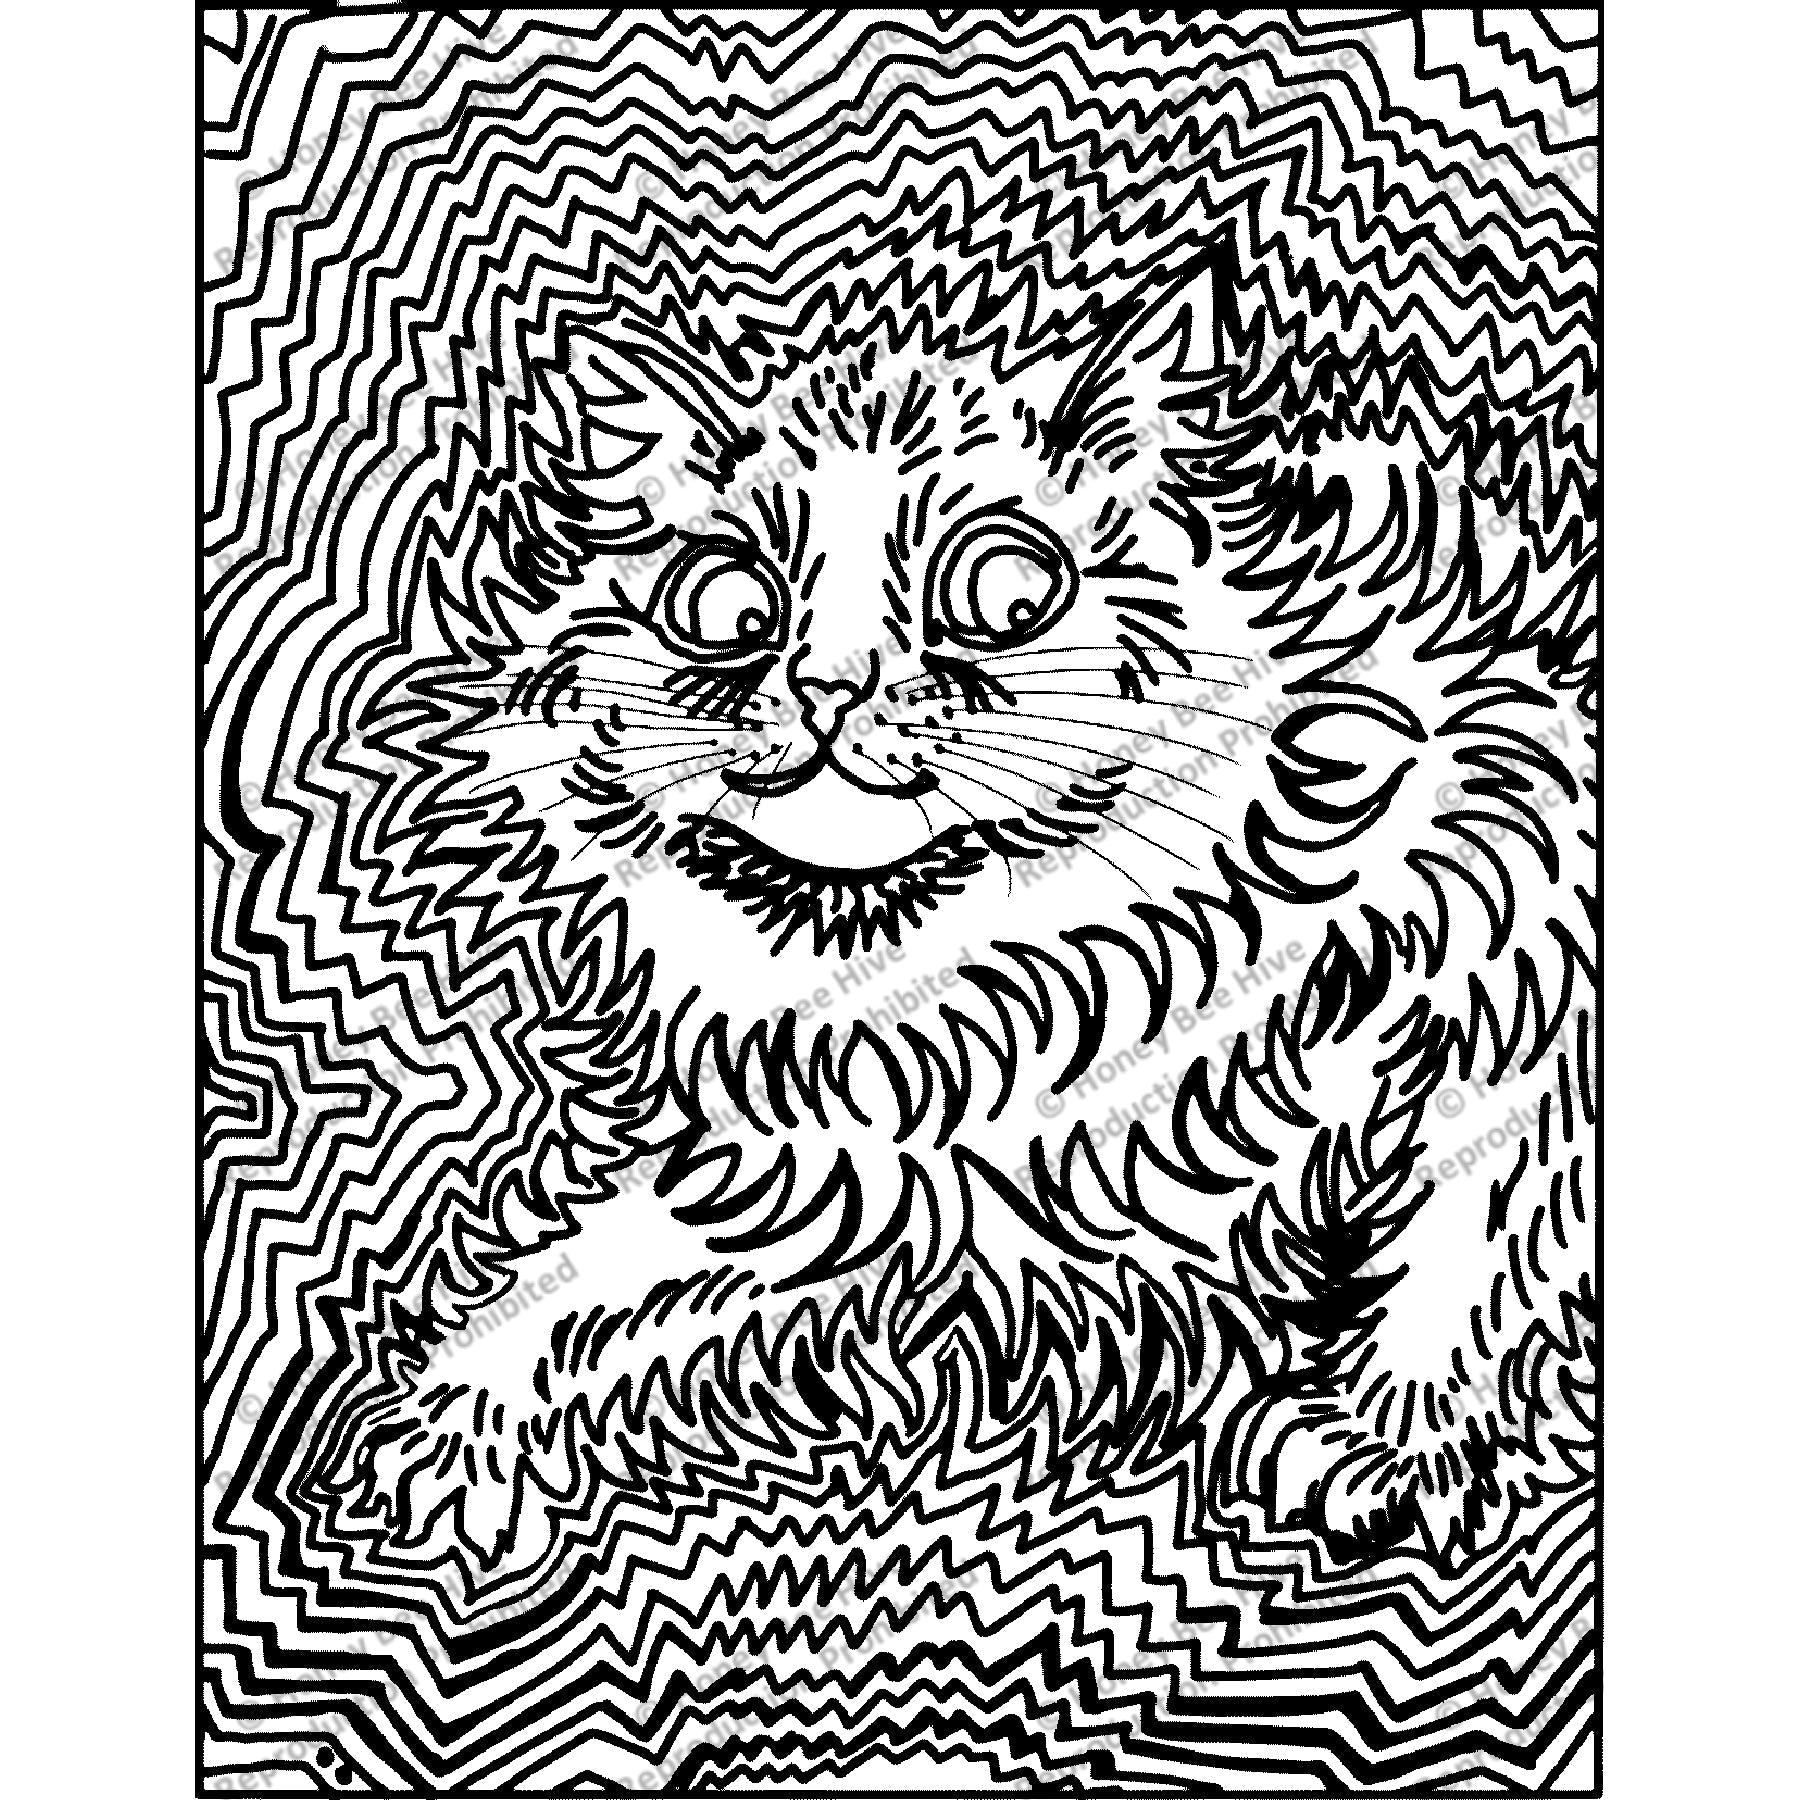 Electric Cat - Full by Louis Wain, rug hooking pattern